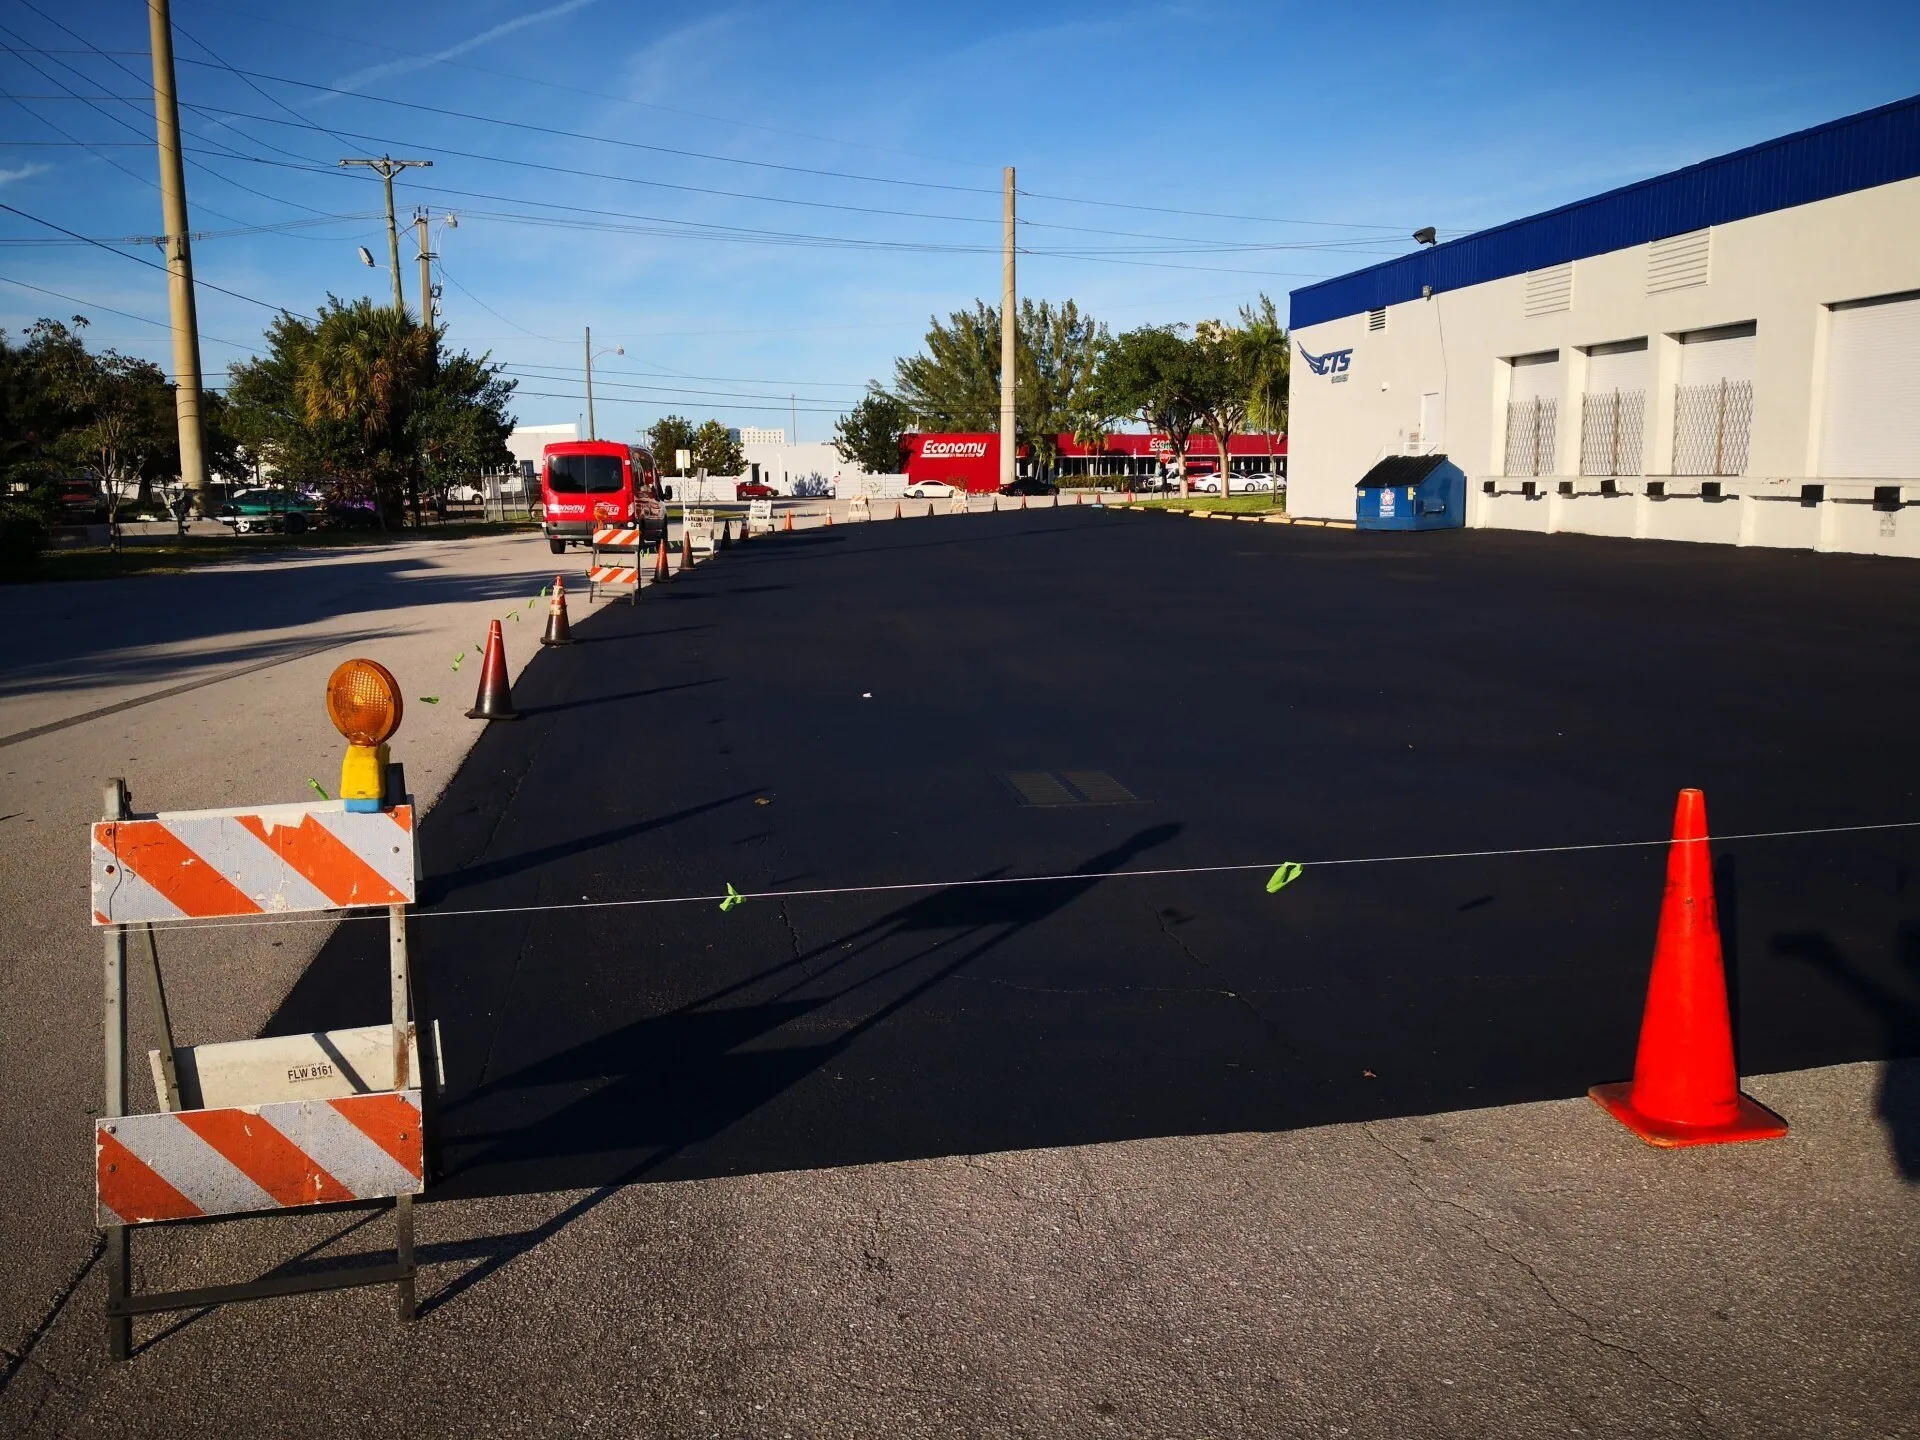 A recently paved parking lot by Jacksonville Asphalt is cordoned off with traffic cones and a barricade to keep vehicles off the new asphalt. An orange warning light is attached to the barricade. In the background, there are trees, power lines, and buildings with colorful signs.